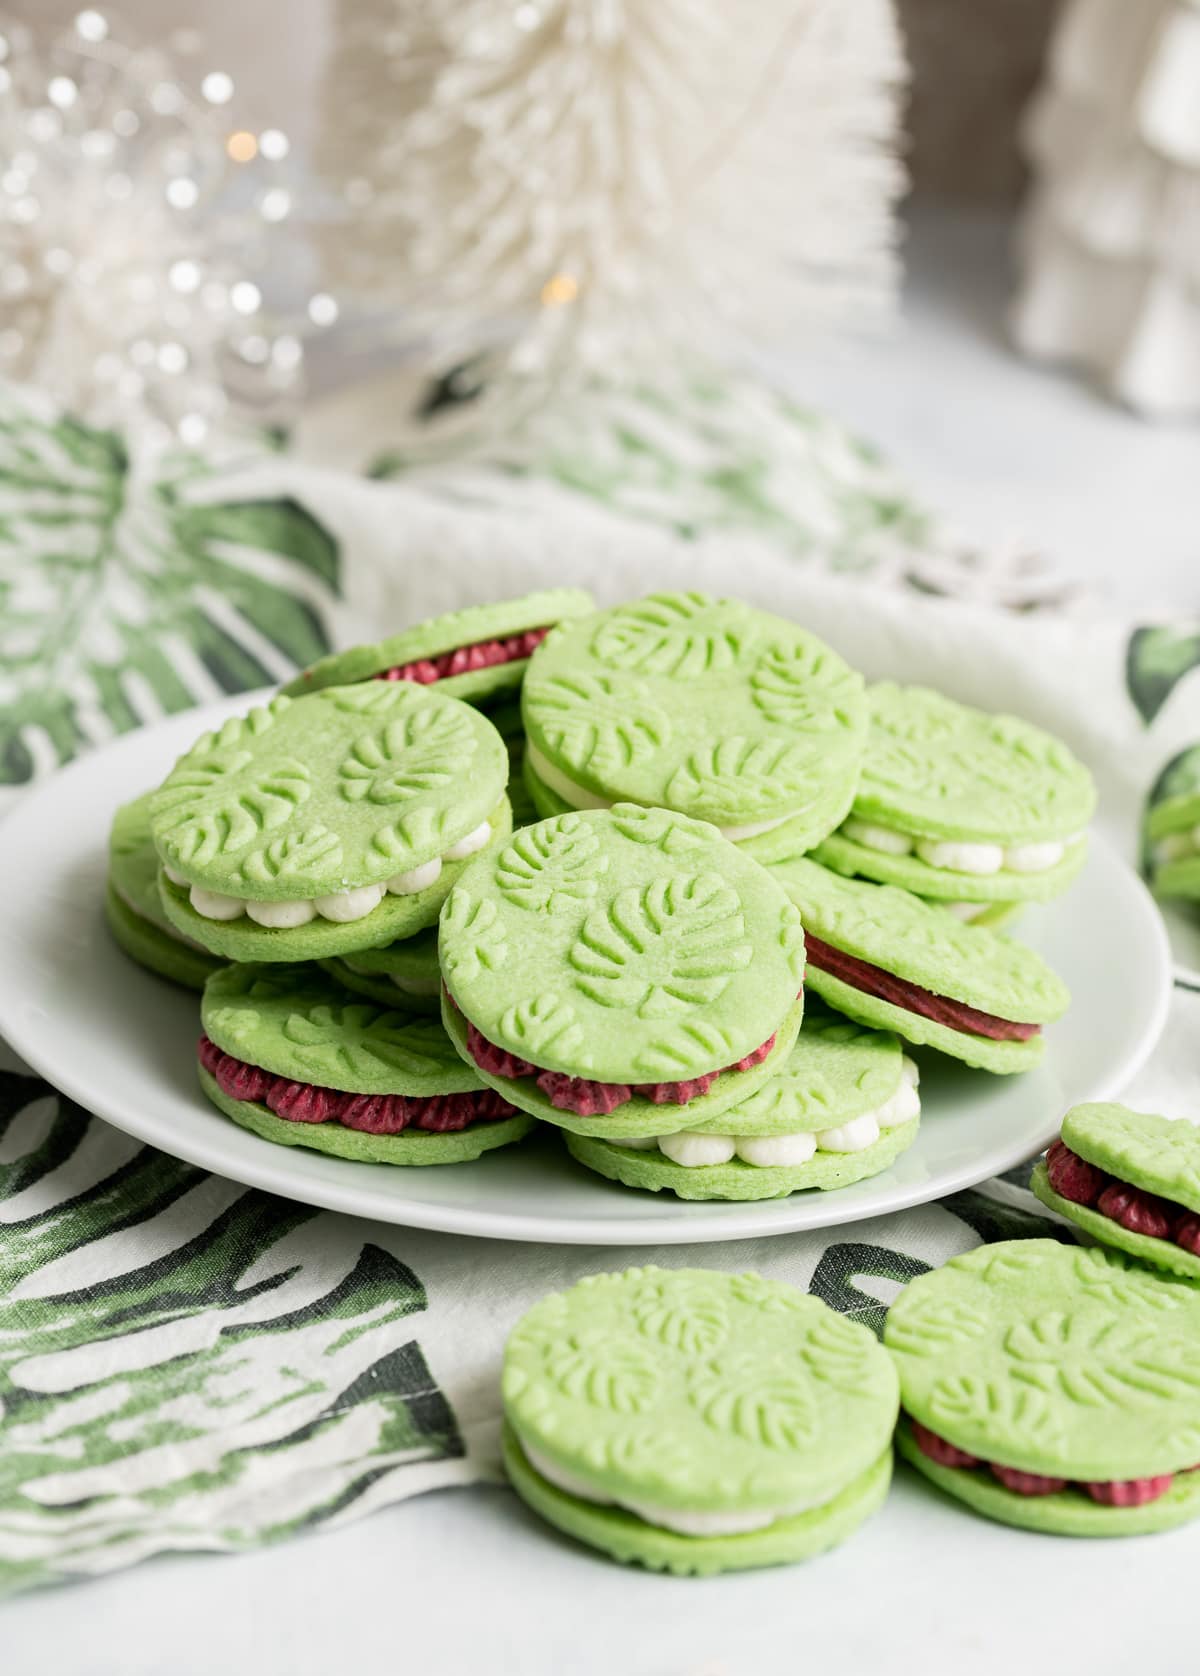 green pandan sandwich cookies with white and red buttercream filling and an embossed monstera leaf pattern on the cookies